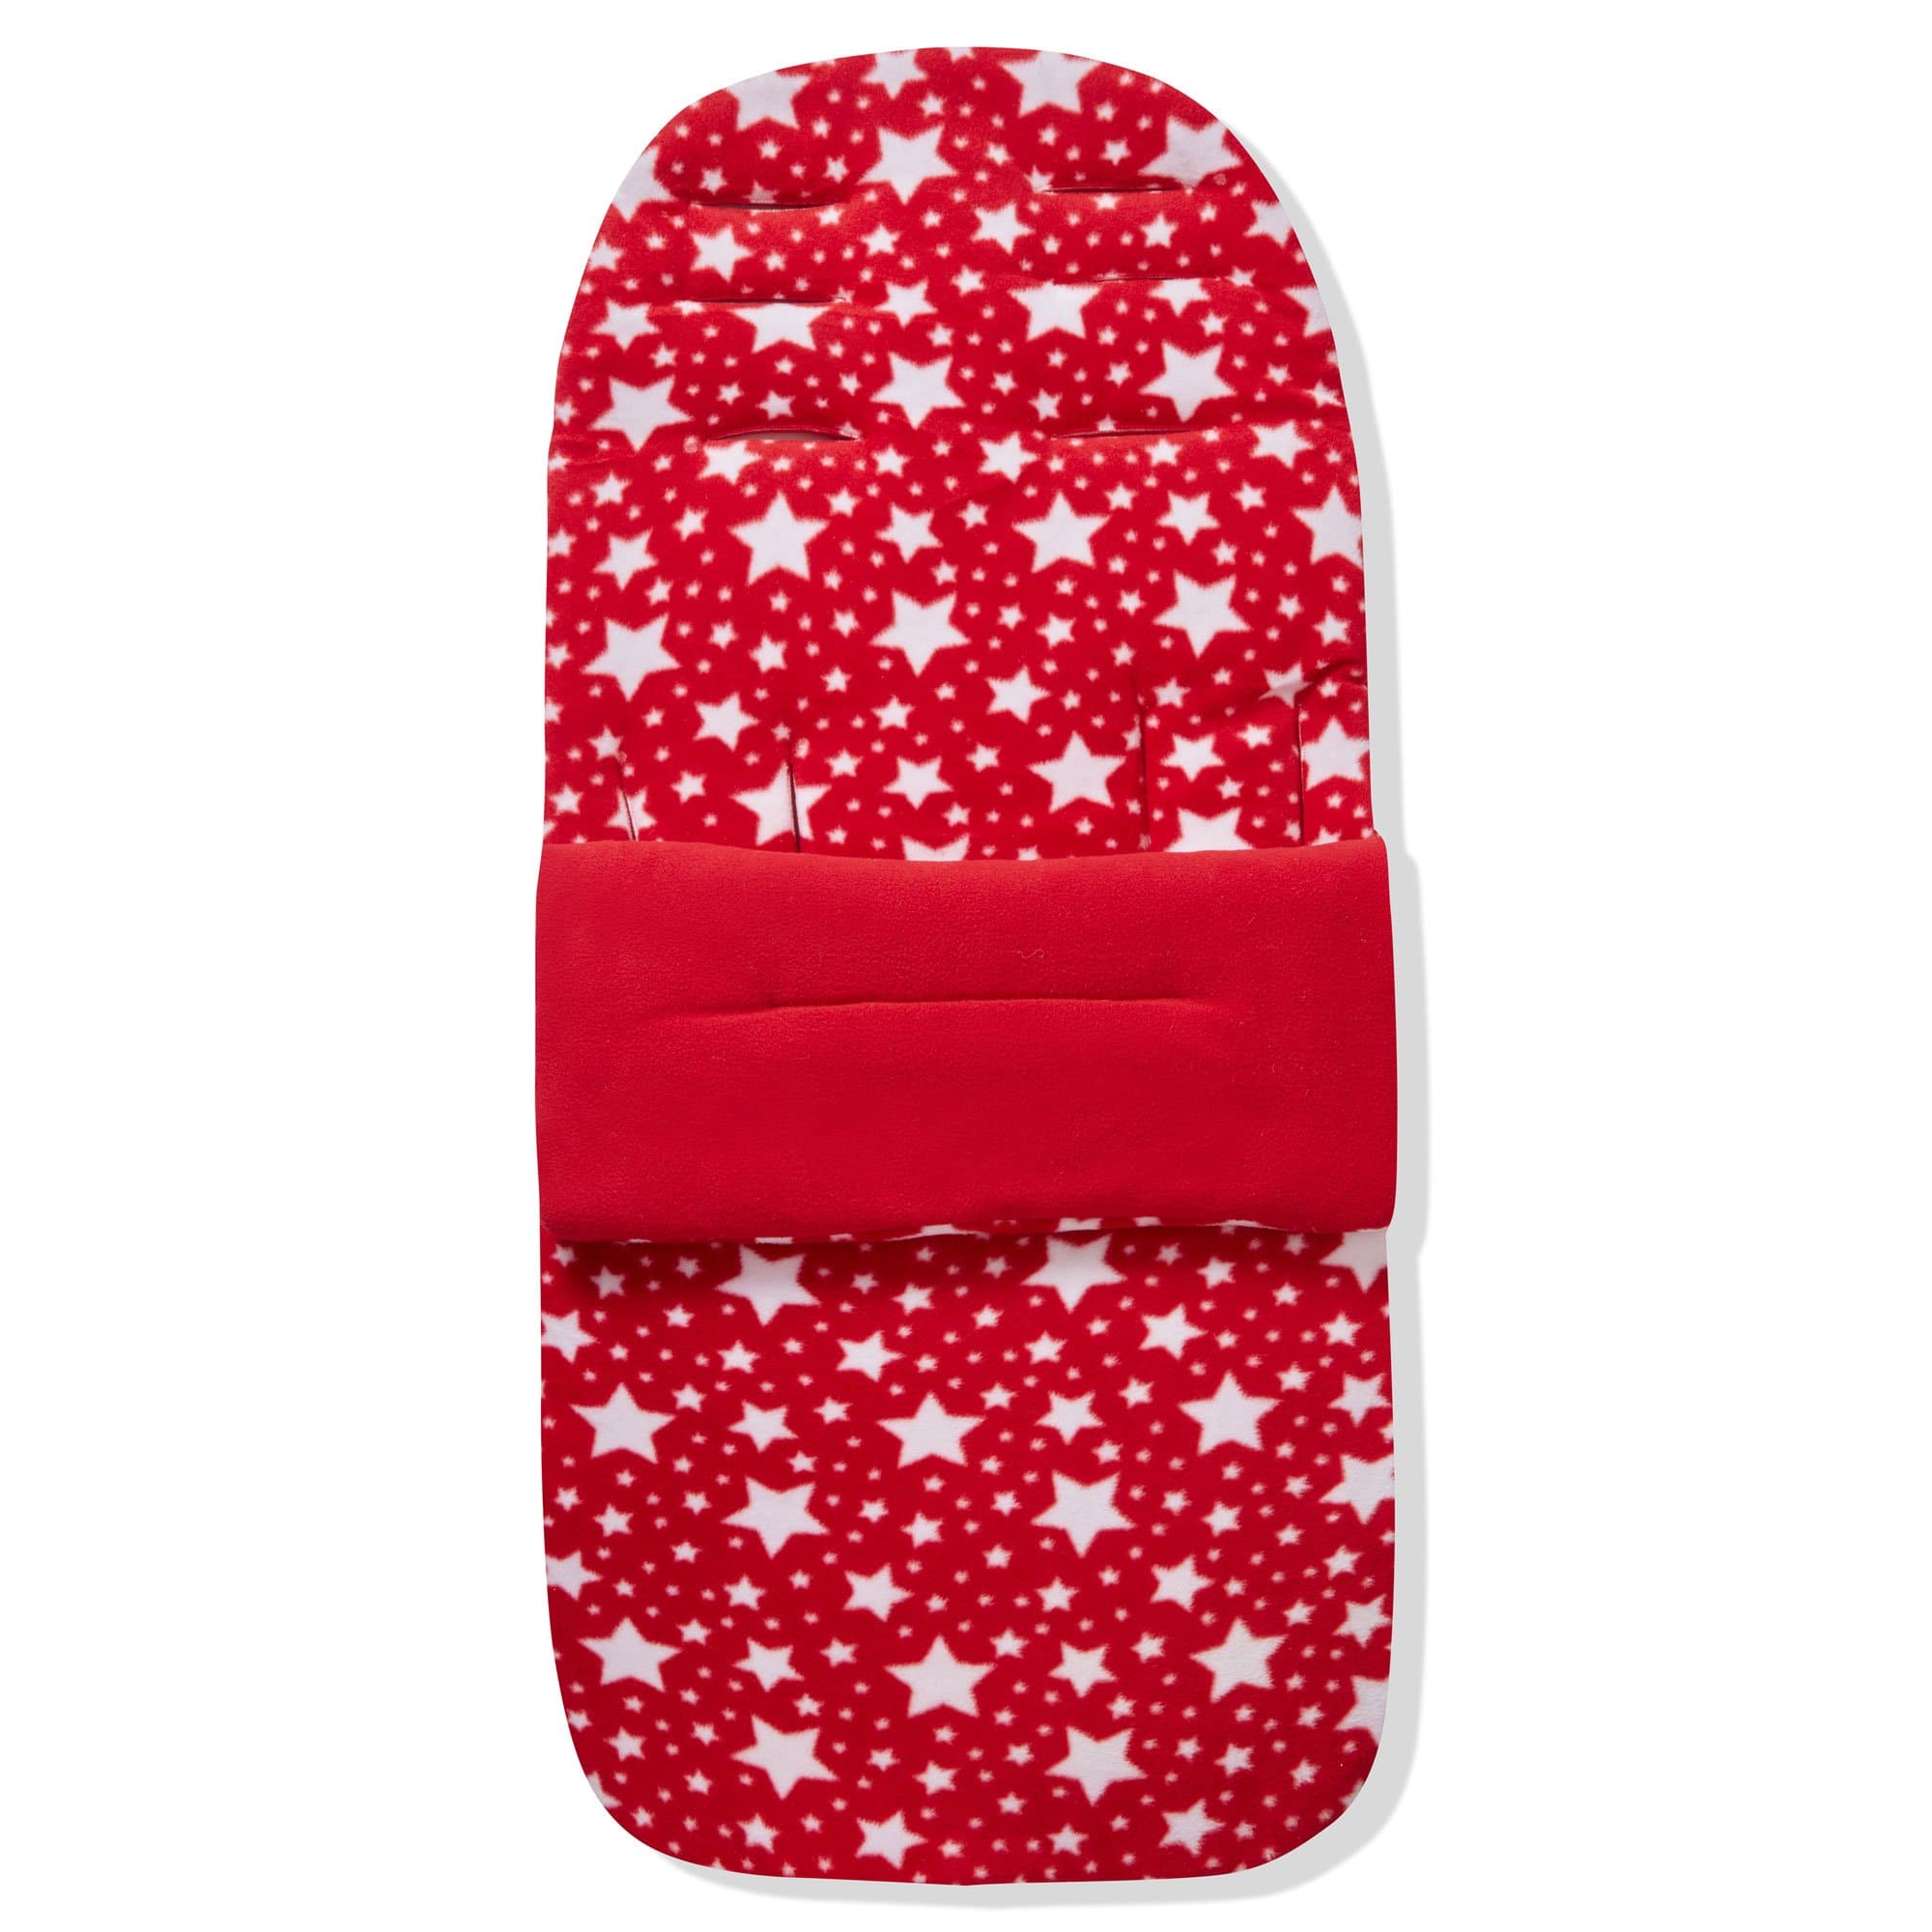 Fleece Footmuff / Cosy Toes Compatible with Nania - Red Star / Fits All Models | For Your Little One